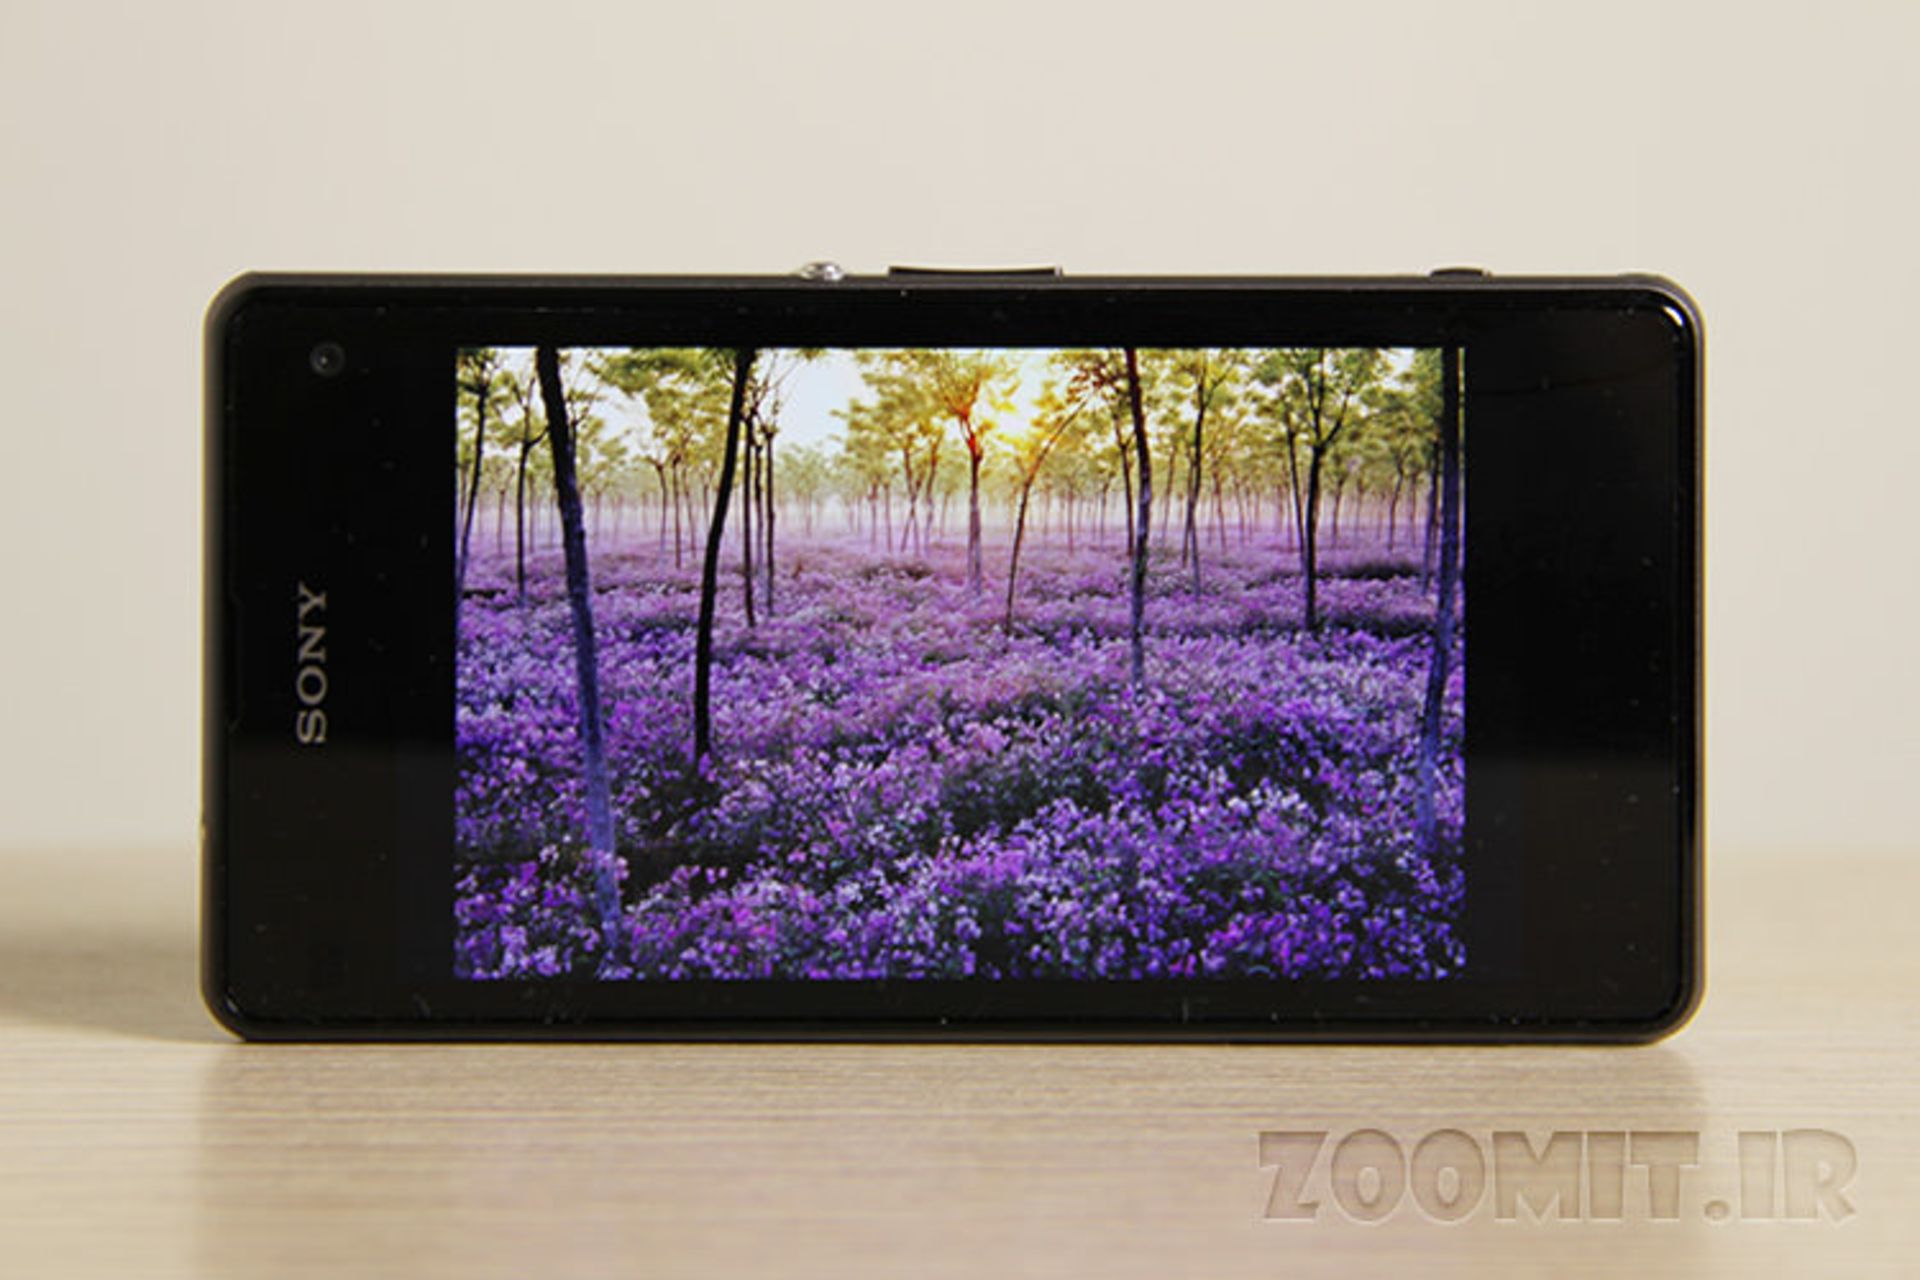 xperia z1 compact display